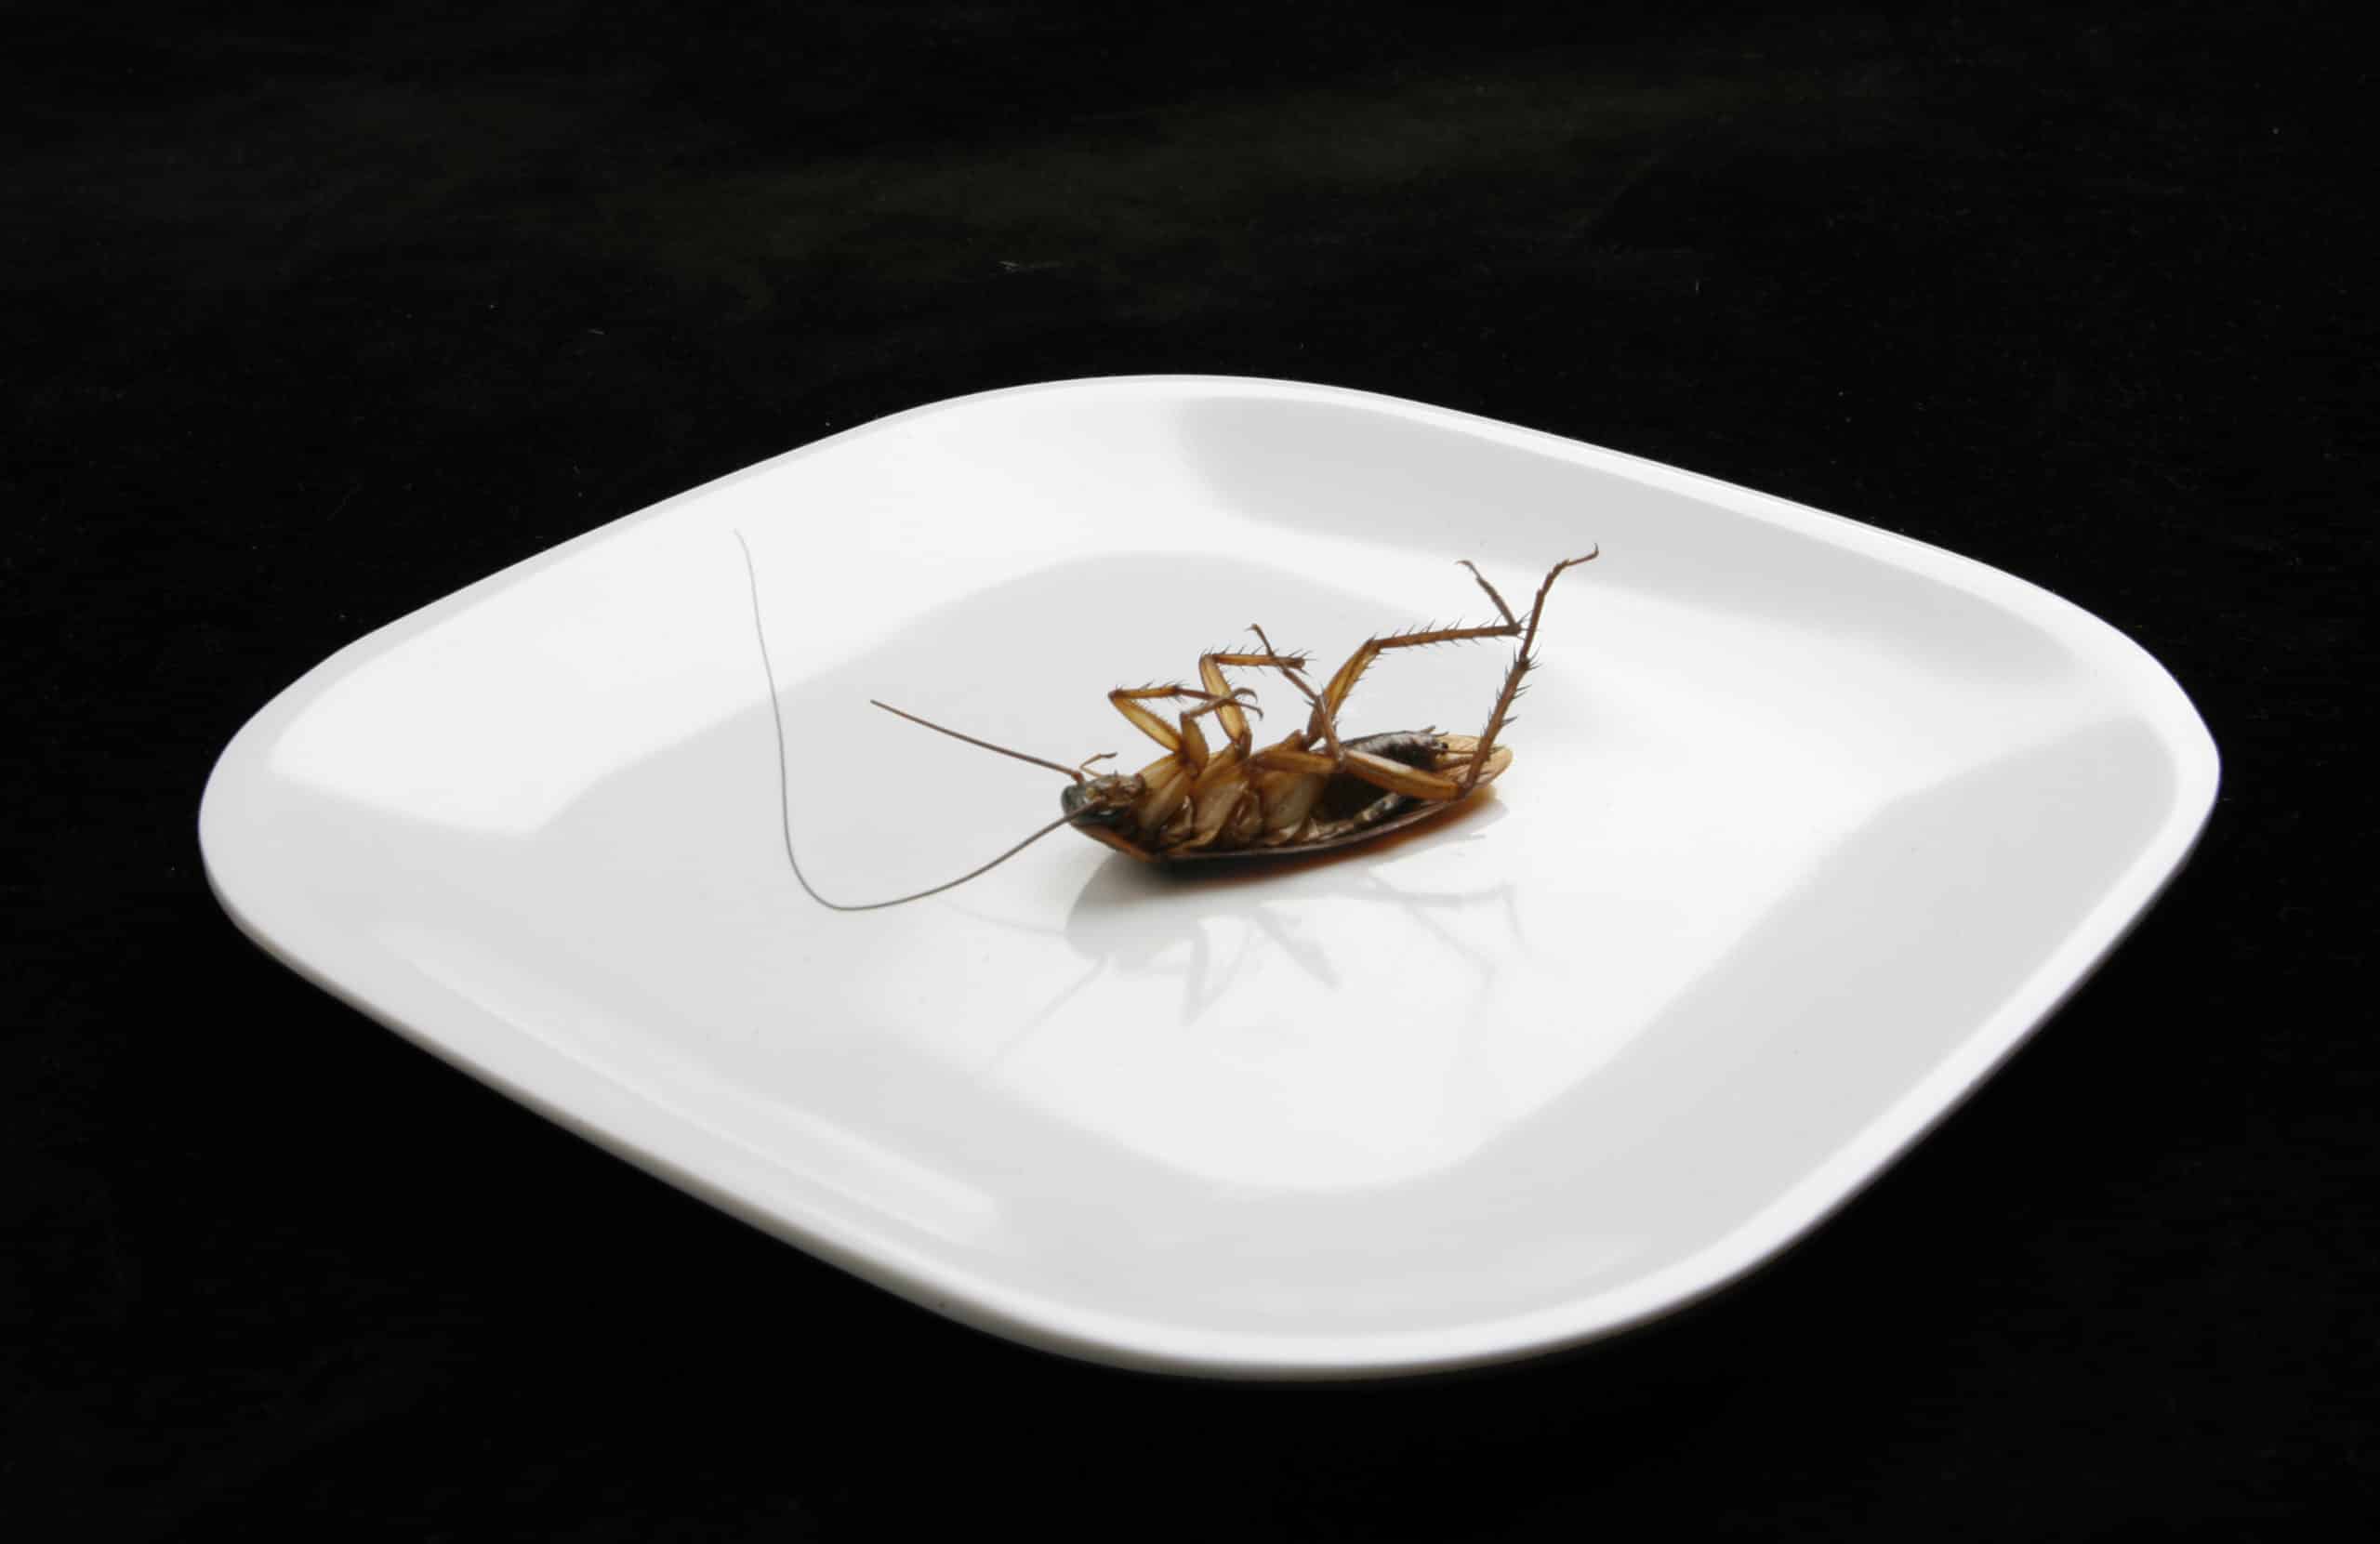 How to deal with pest infestations in a restaurant - hire the right professionals